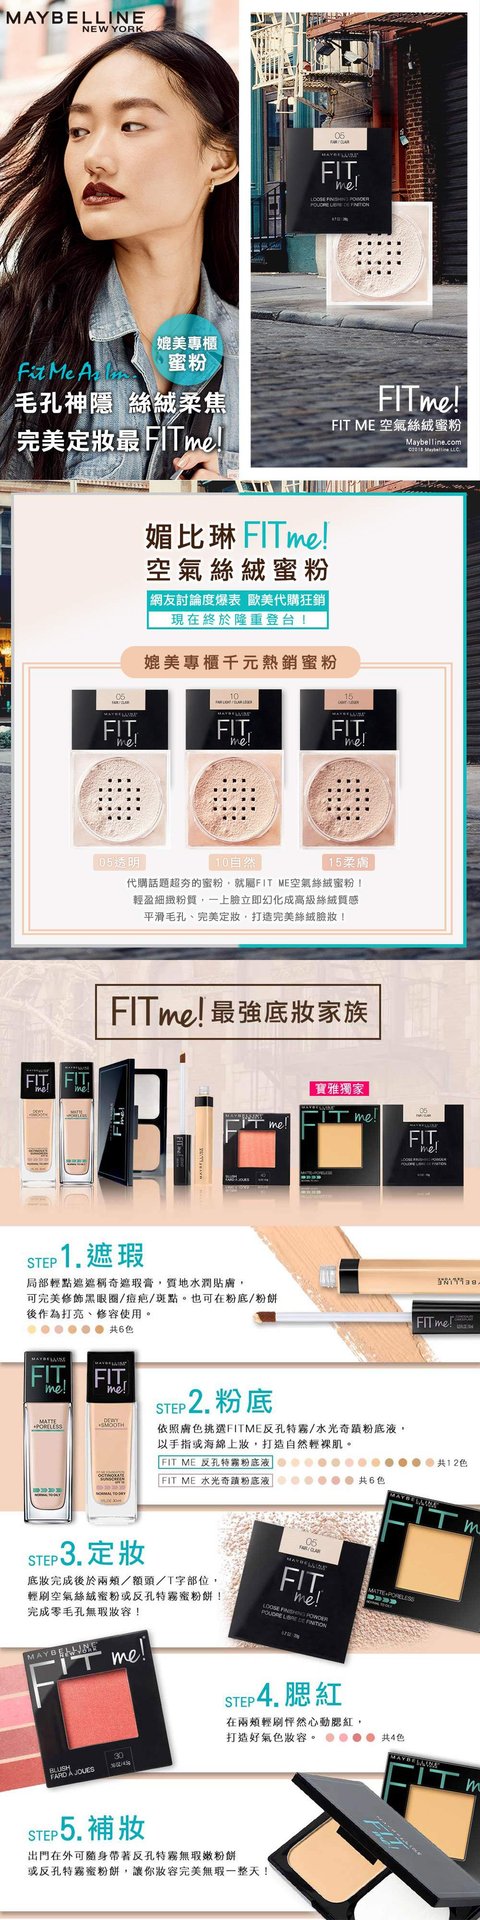 201911 Fit Me Loose Powder product content